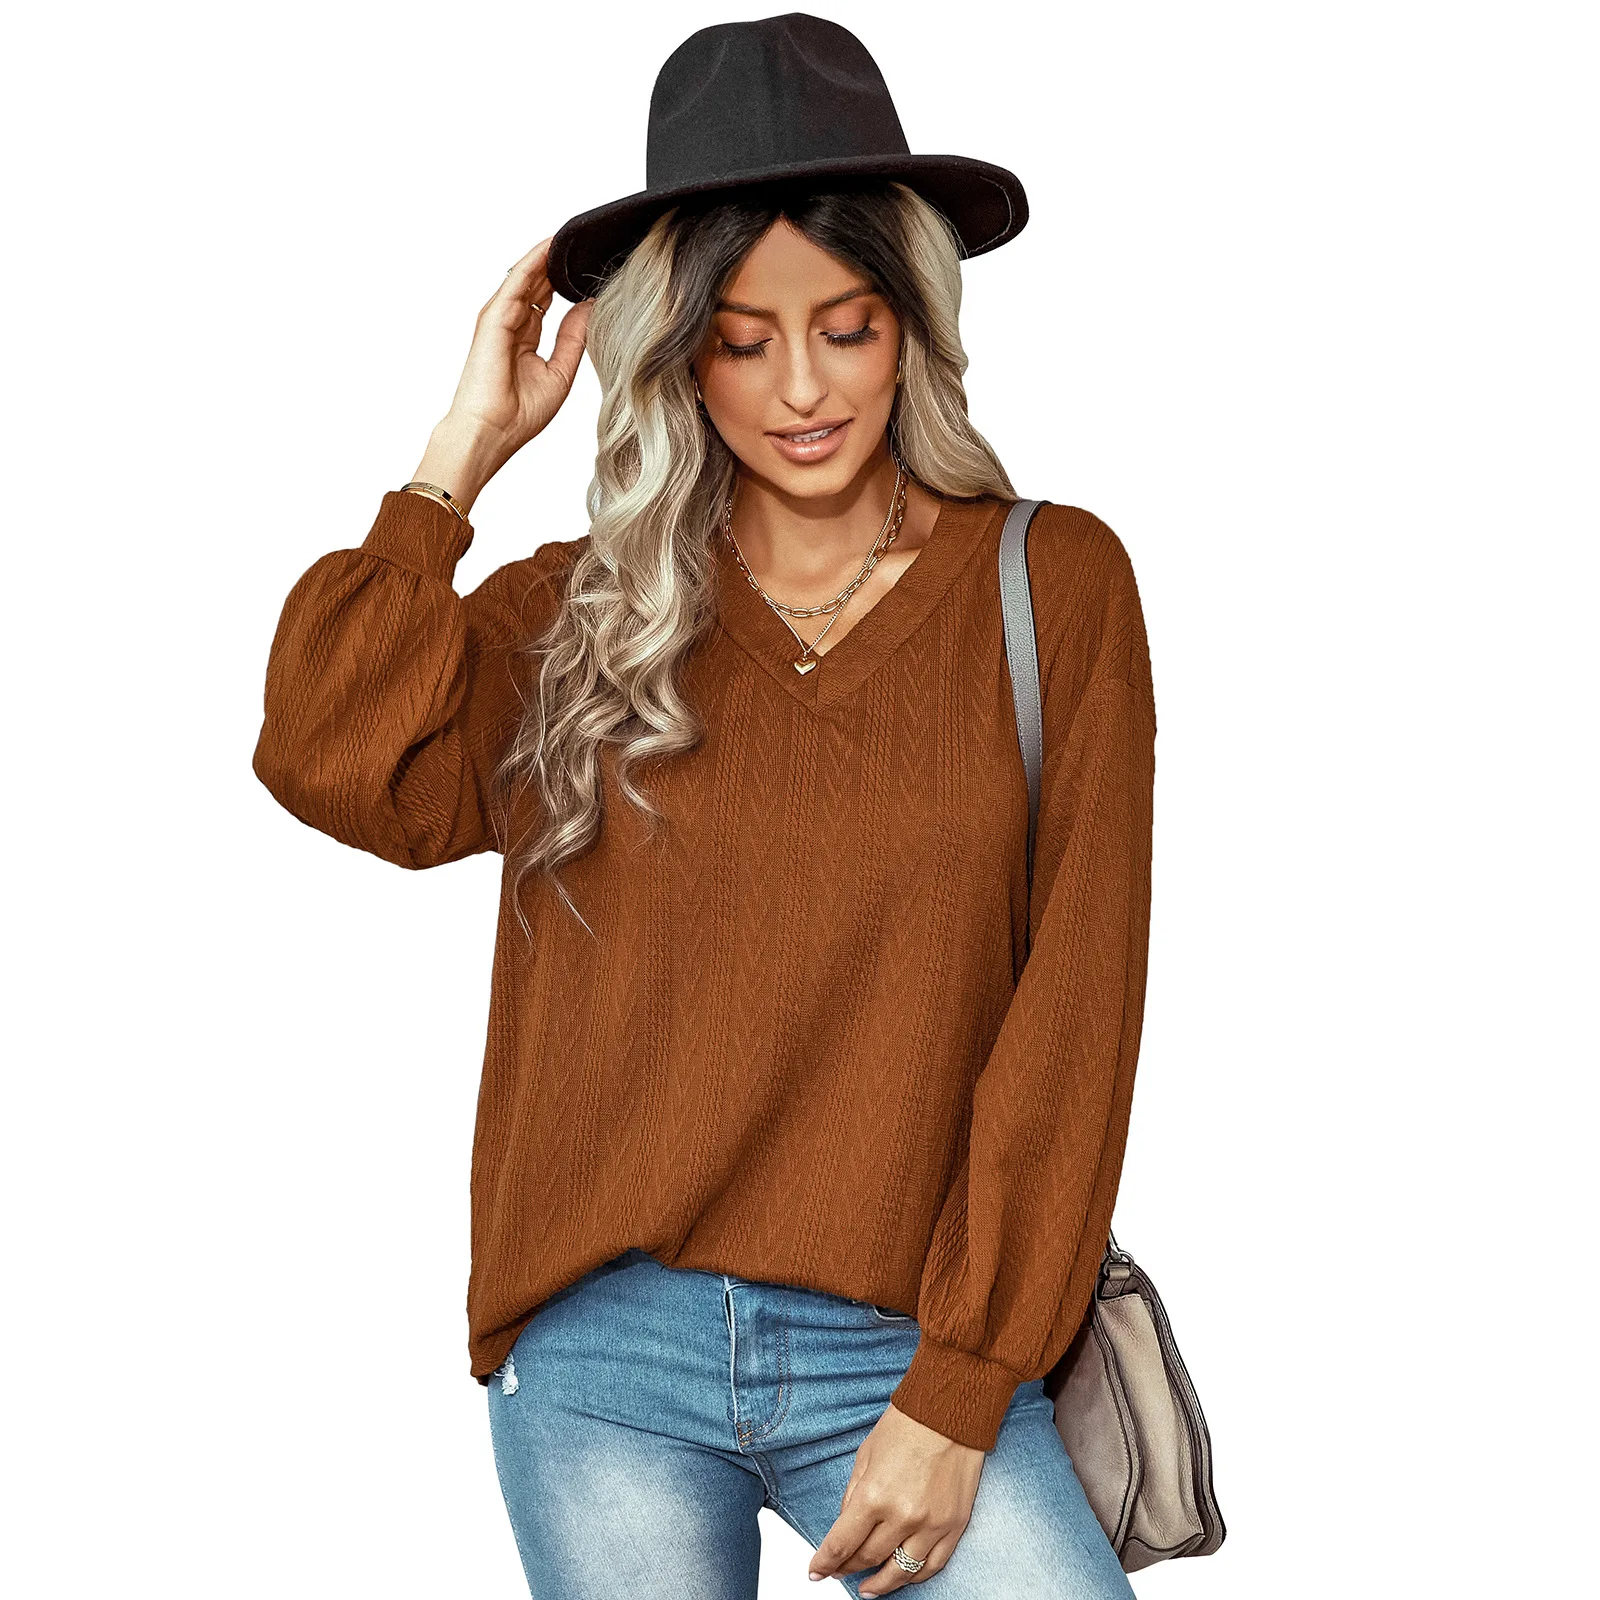 2022 Early Autumn New Thin Tops Women's Fashion Jacquard V-neck Sweaters for Outer Wear Woman Sweaters Tops Sueter Mujer enlarge